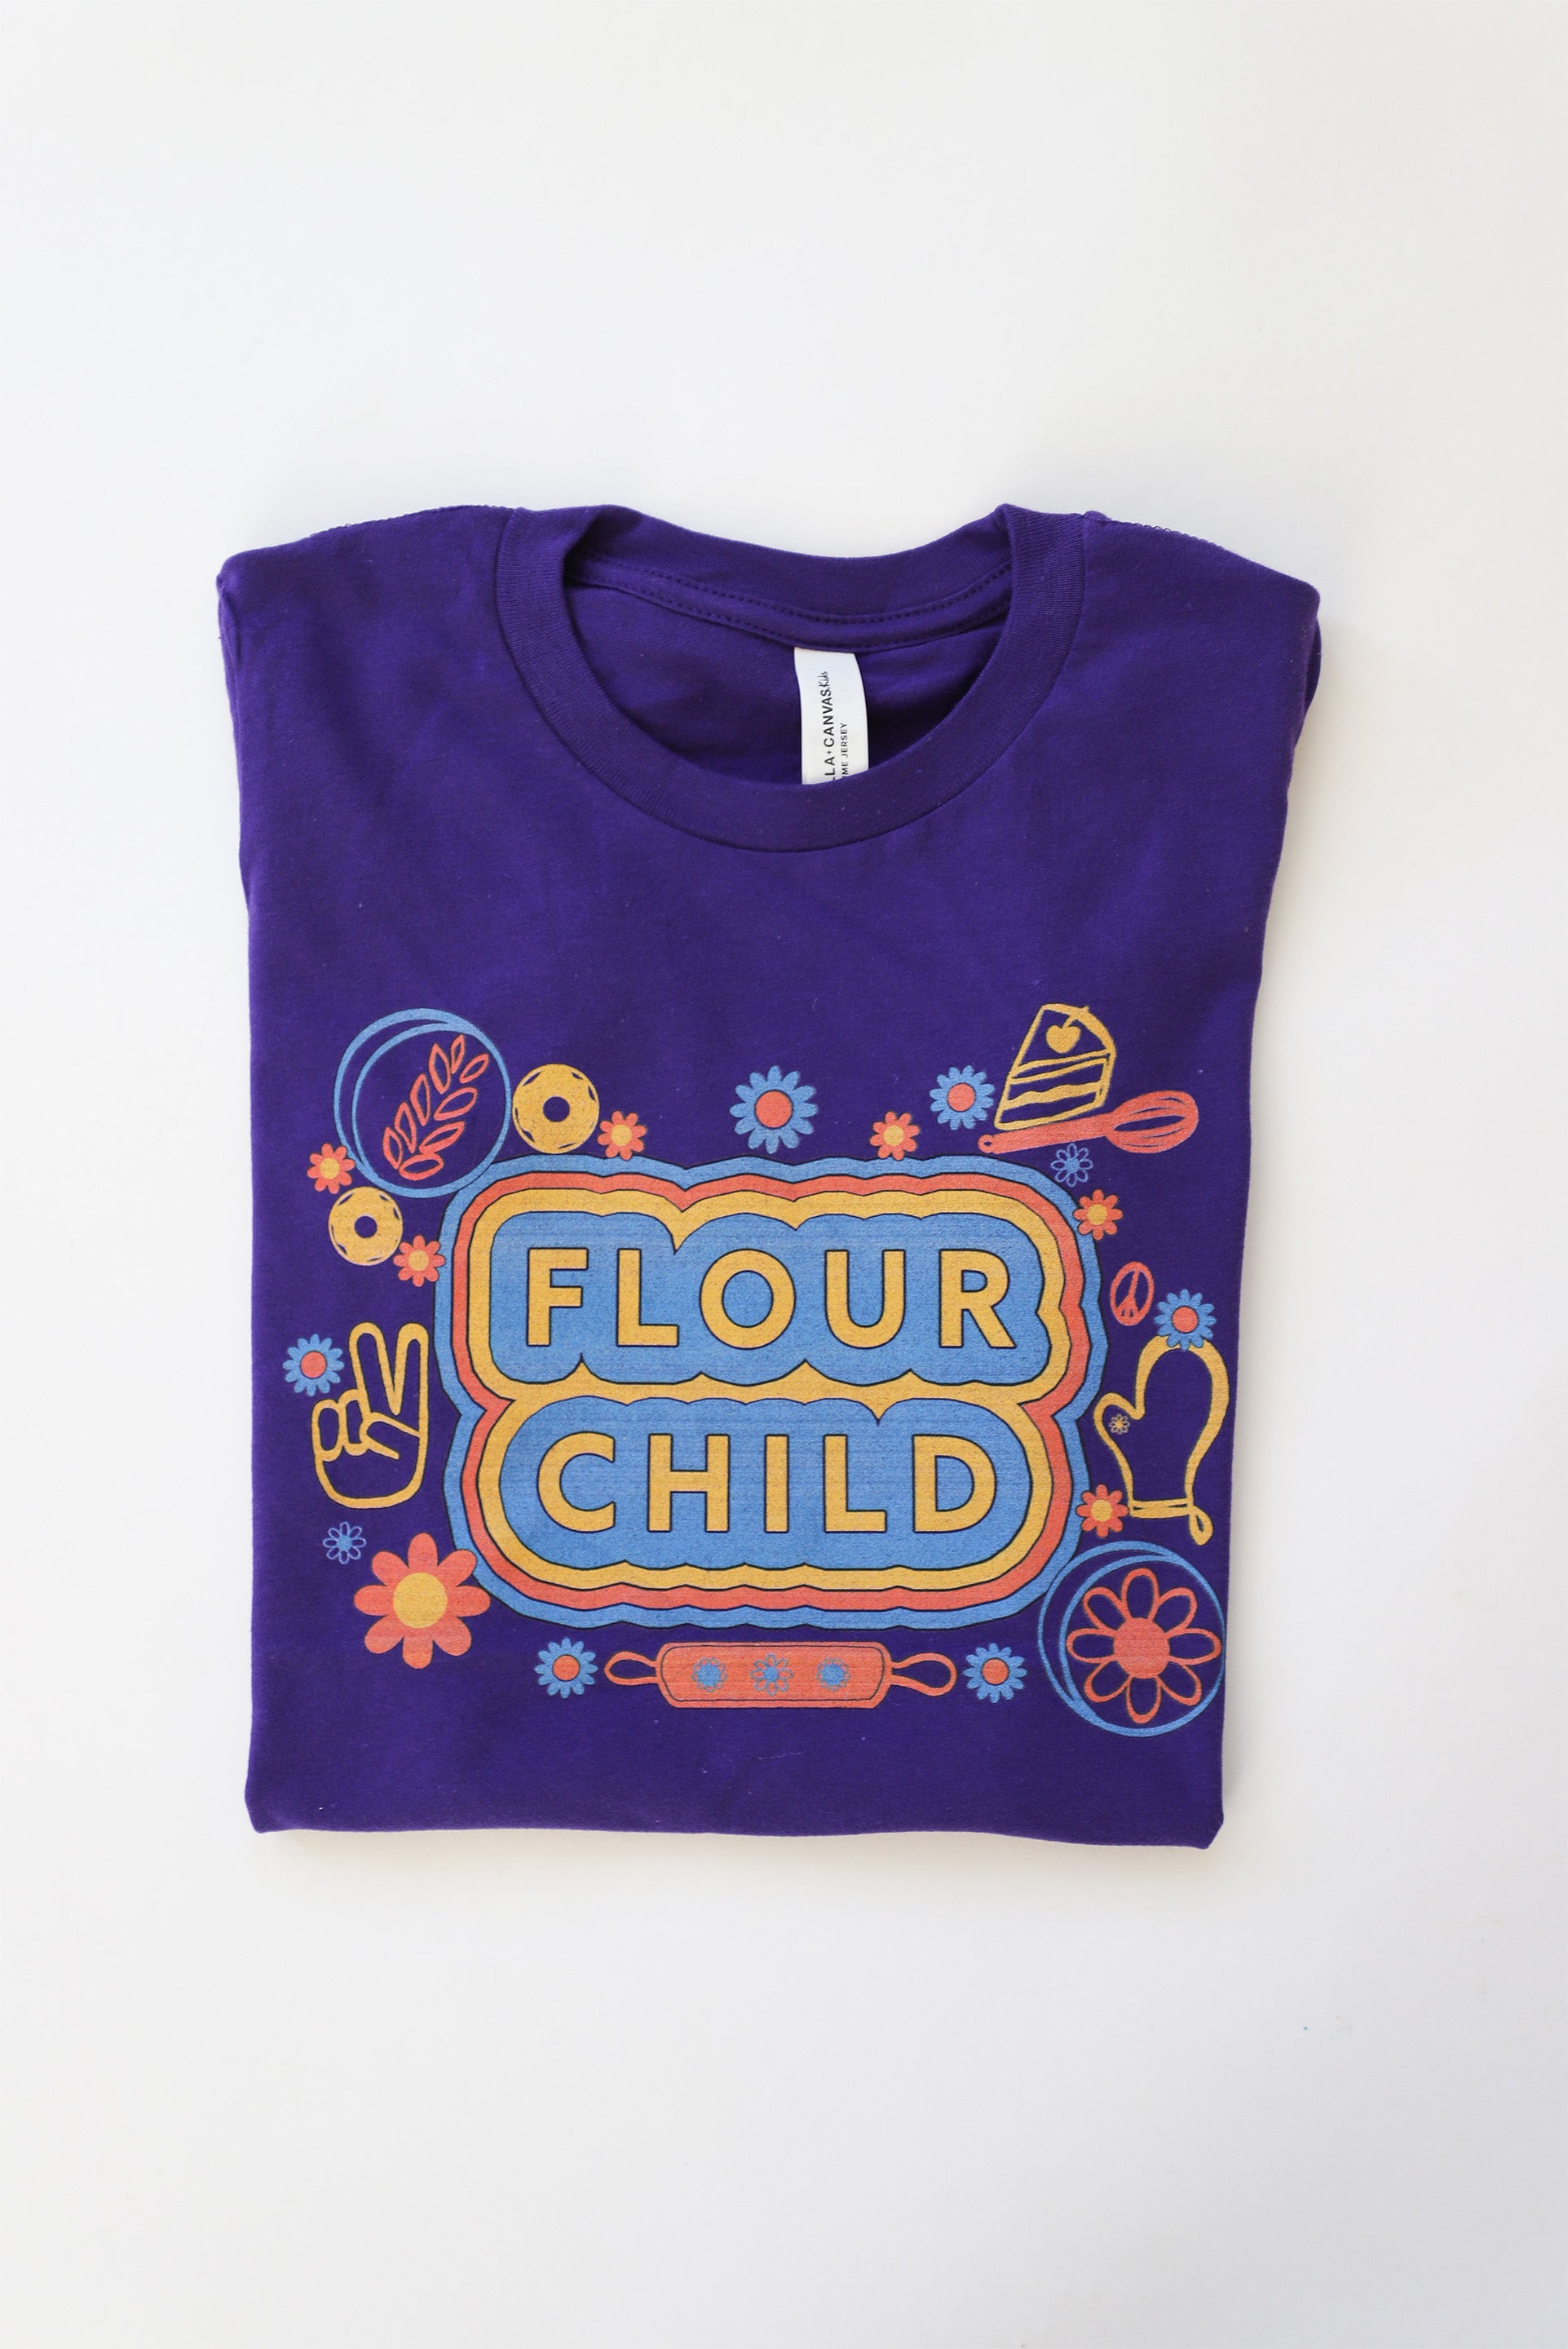 A folded purple youth t-short with "Flour Child" in block letters surrounded by bright illustrations